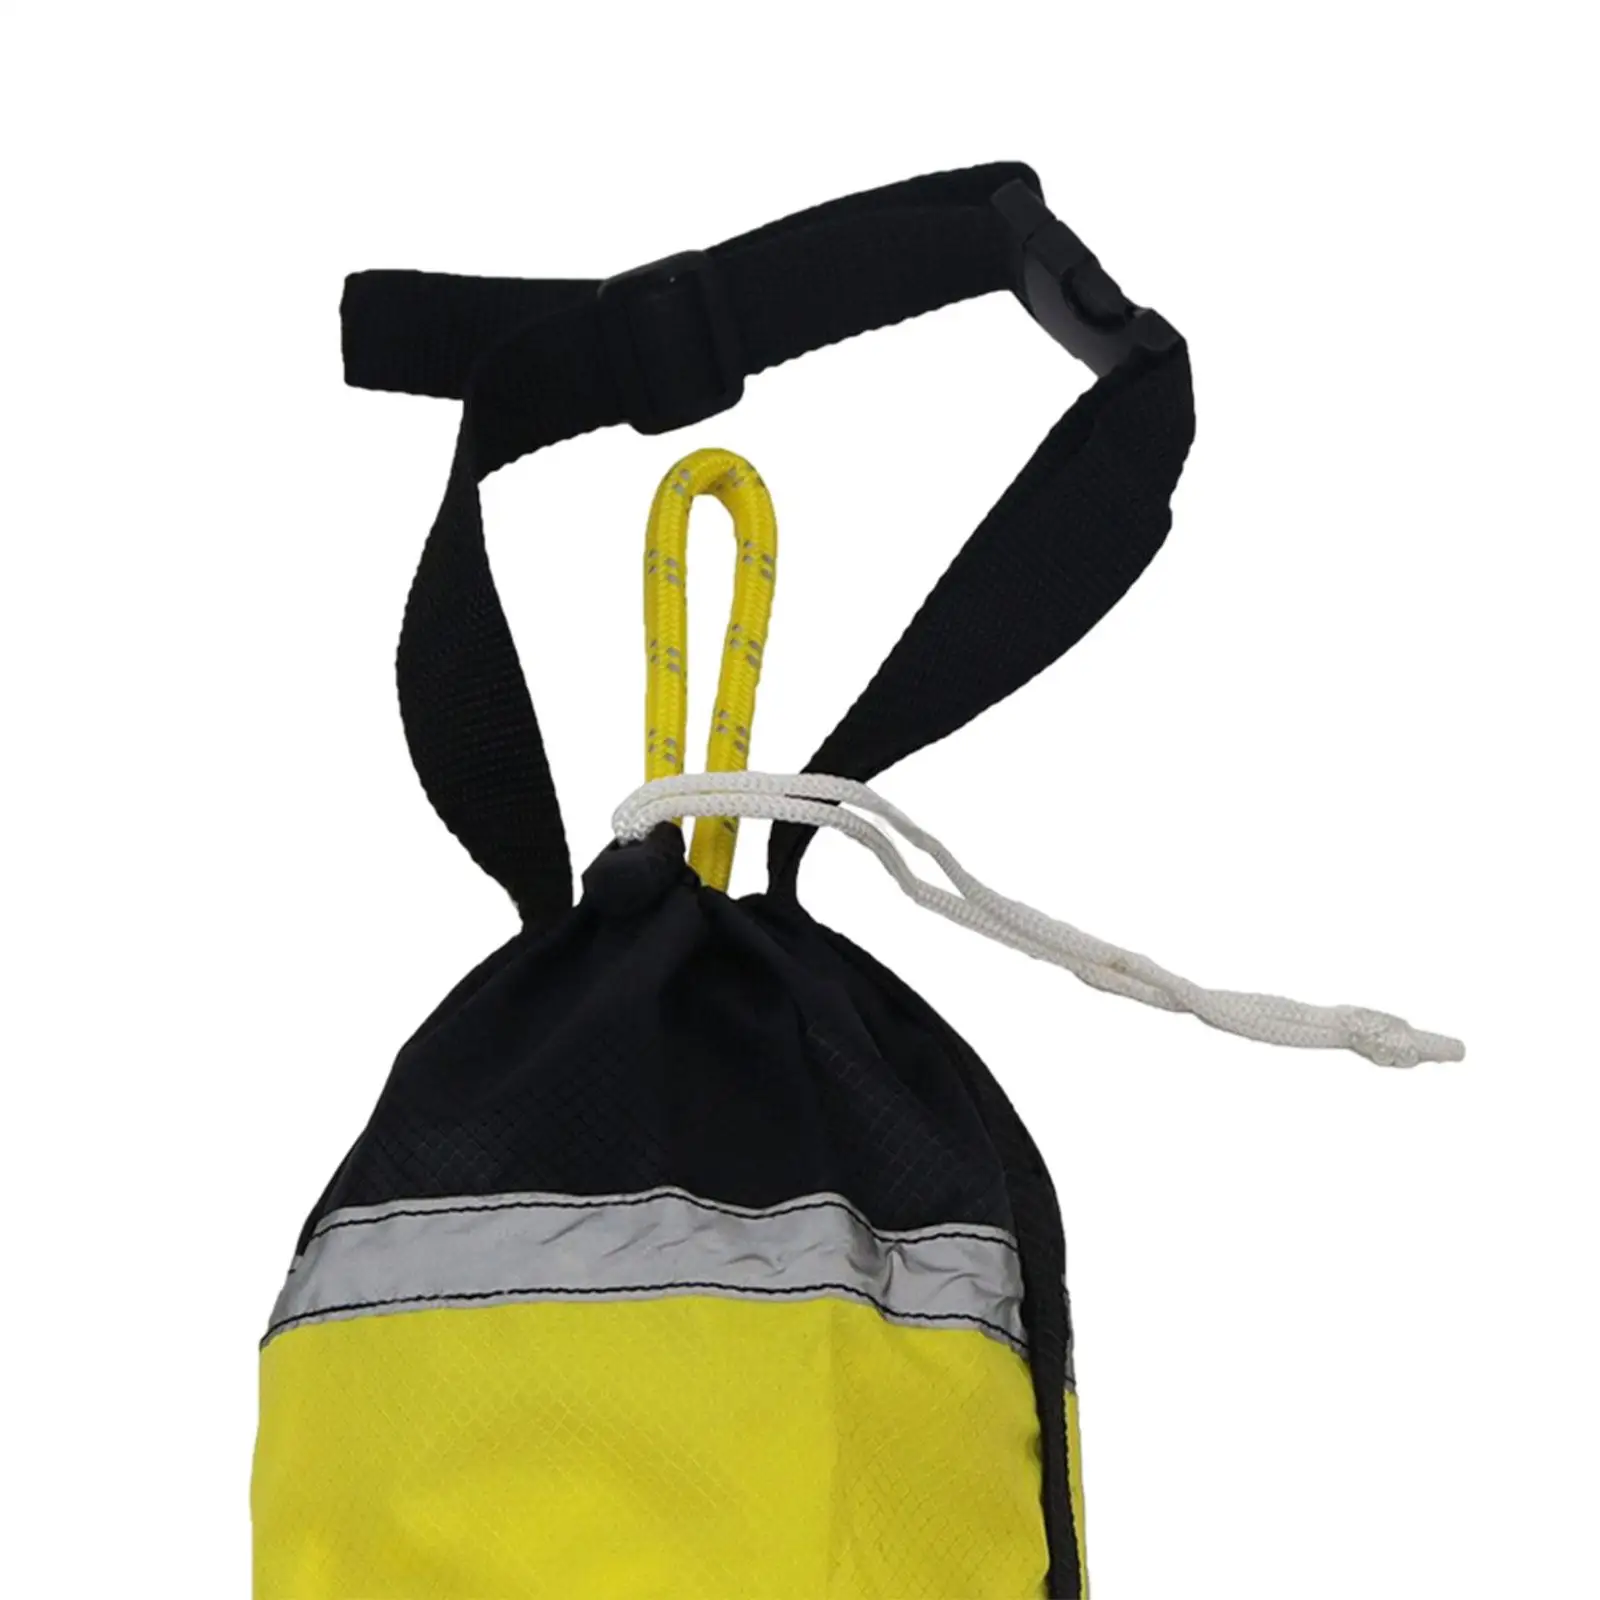 Throw Bags for Water Rescue Floating Rescue Rope High Visibility for Boat Swimming Canoeing Water Sport Kayaking Device